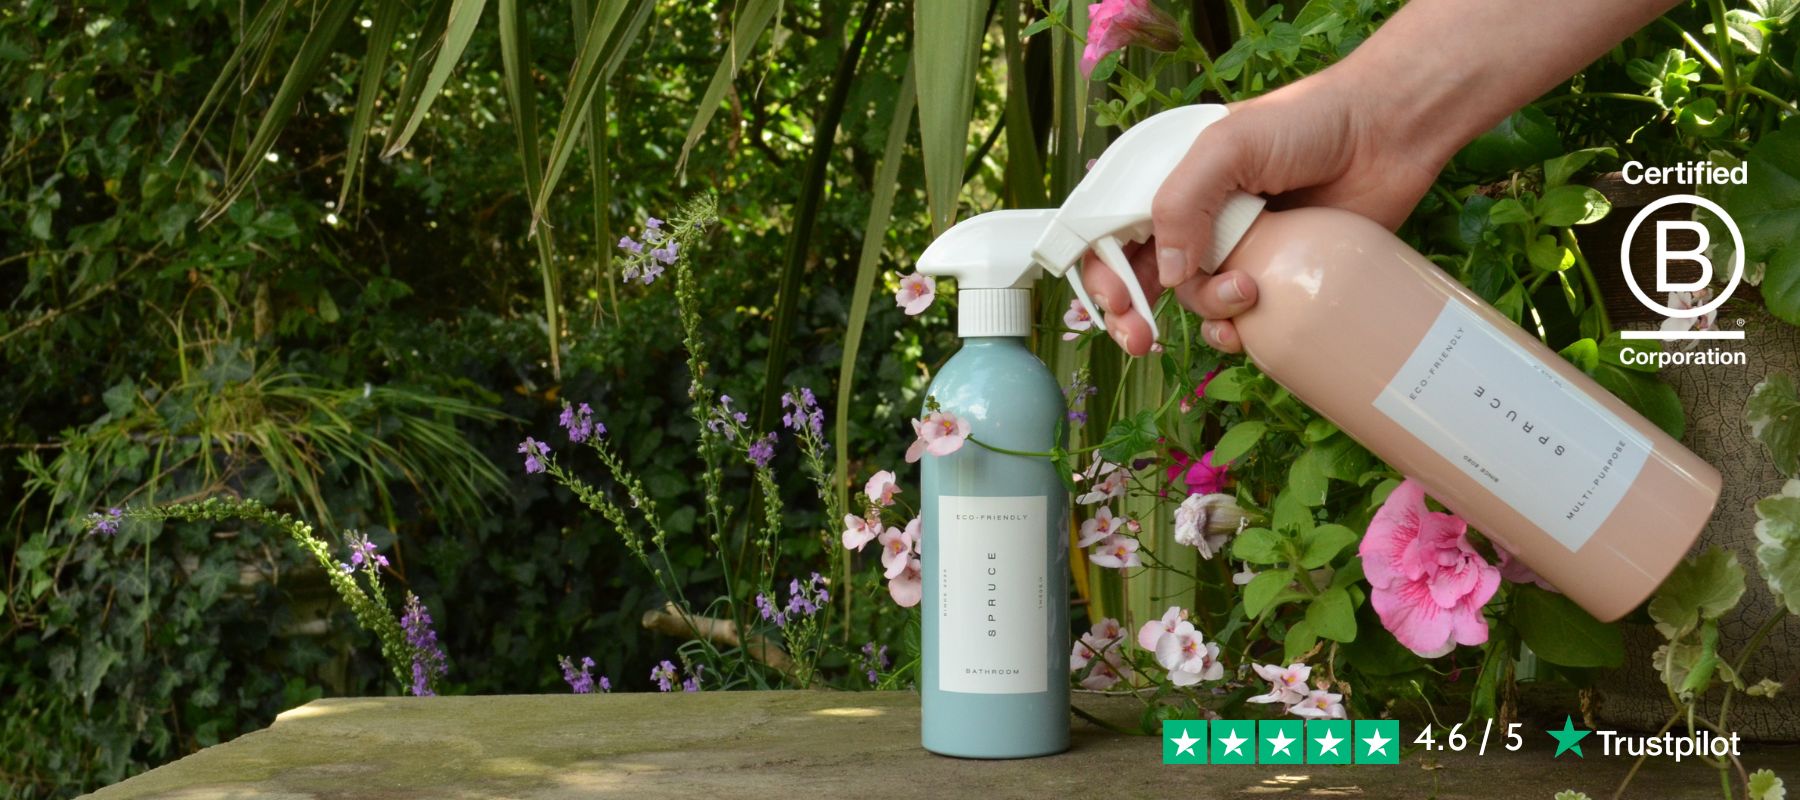 Hand spraying natural cleaning products outside